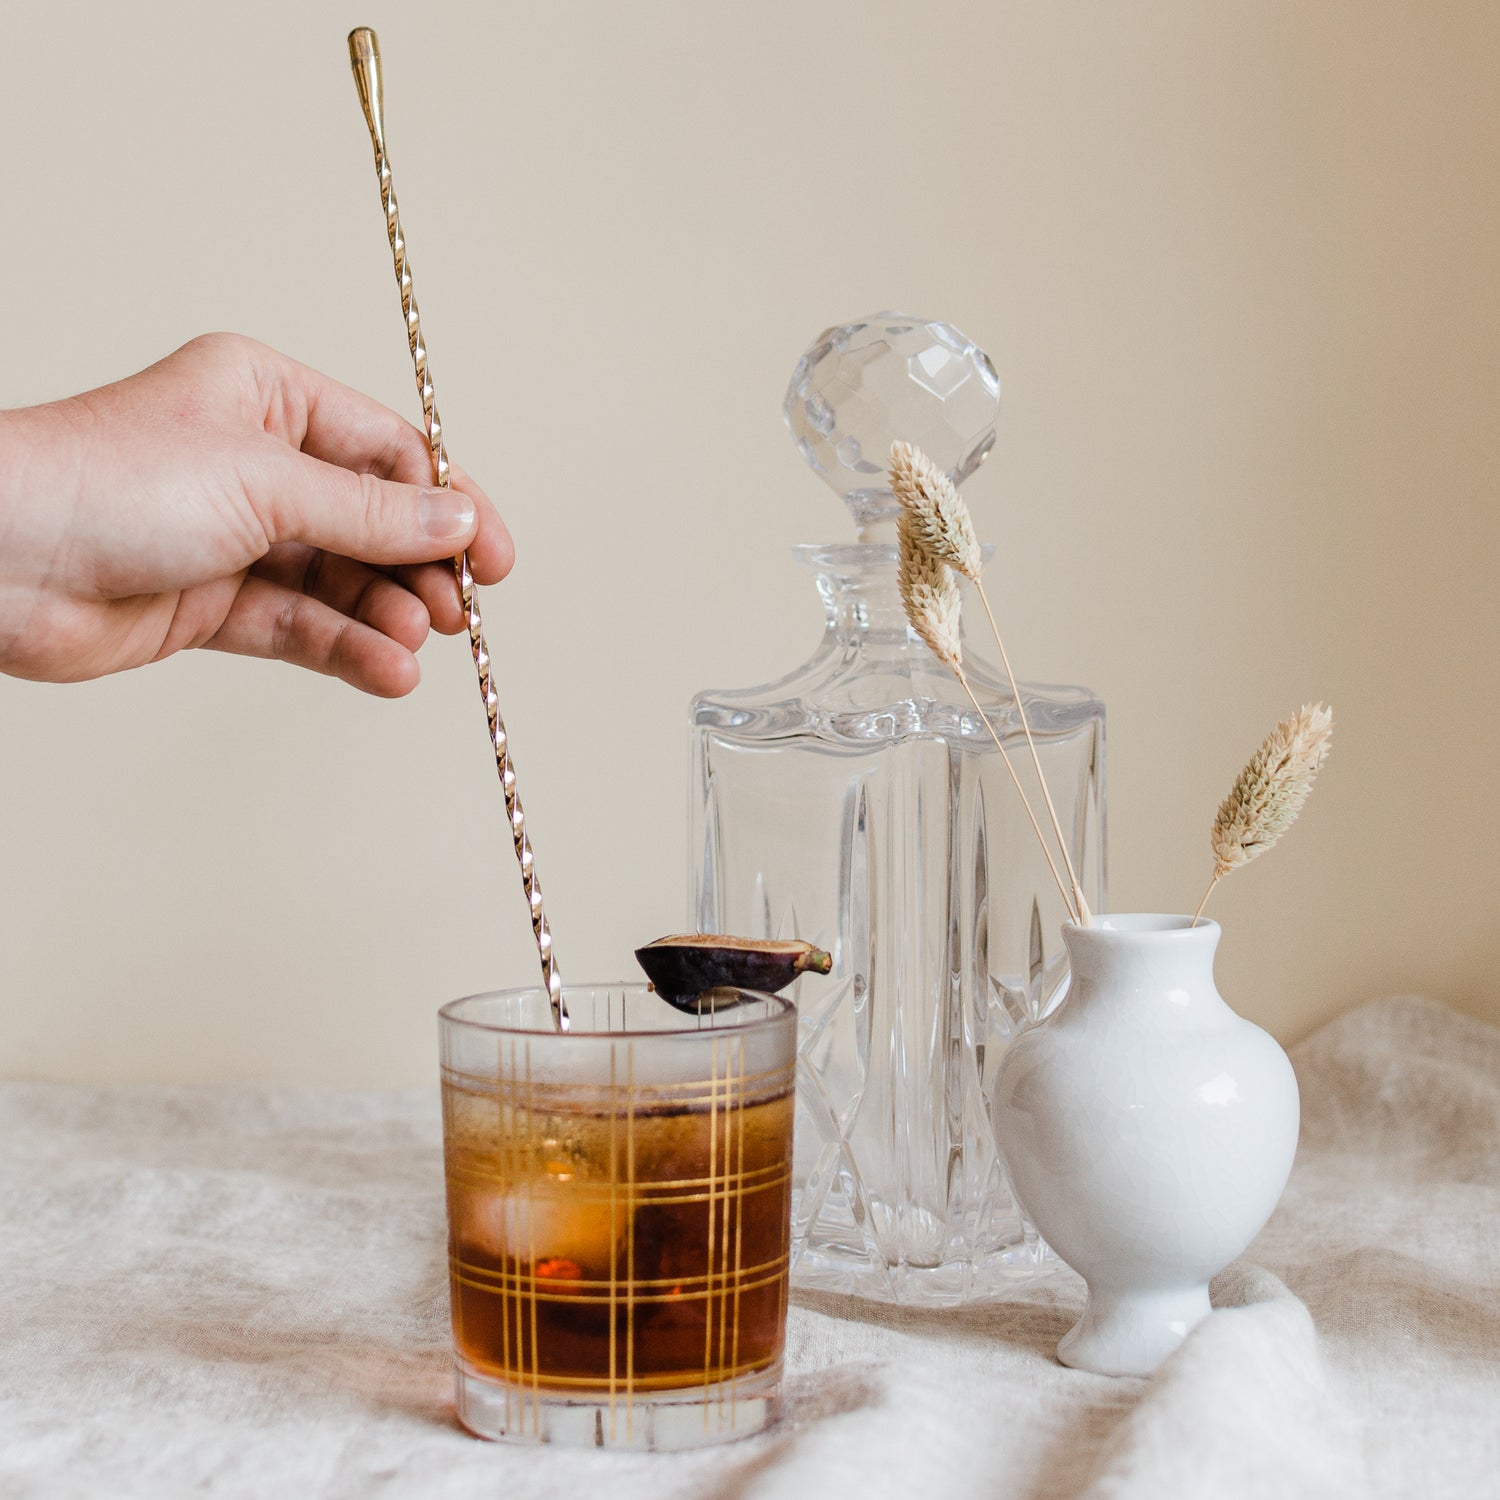 Gingersnap Cocktail Infusion Kit